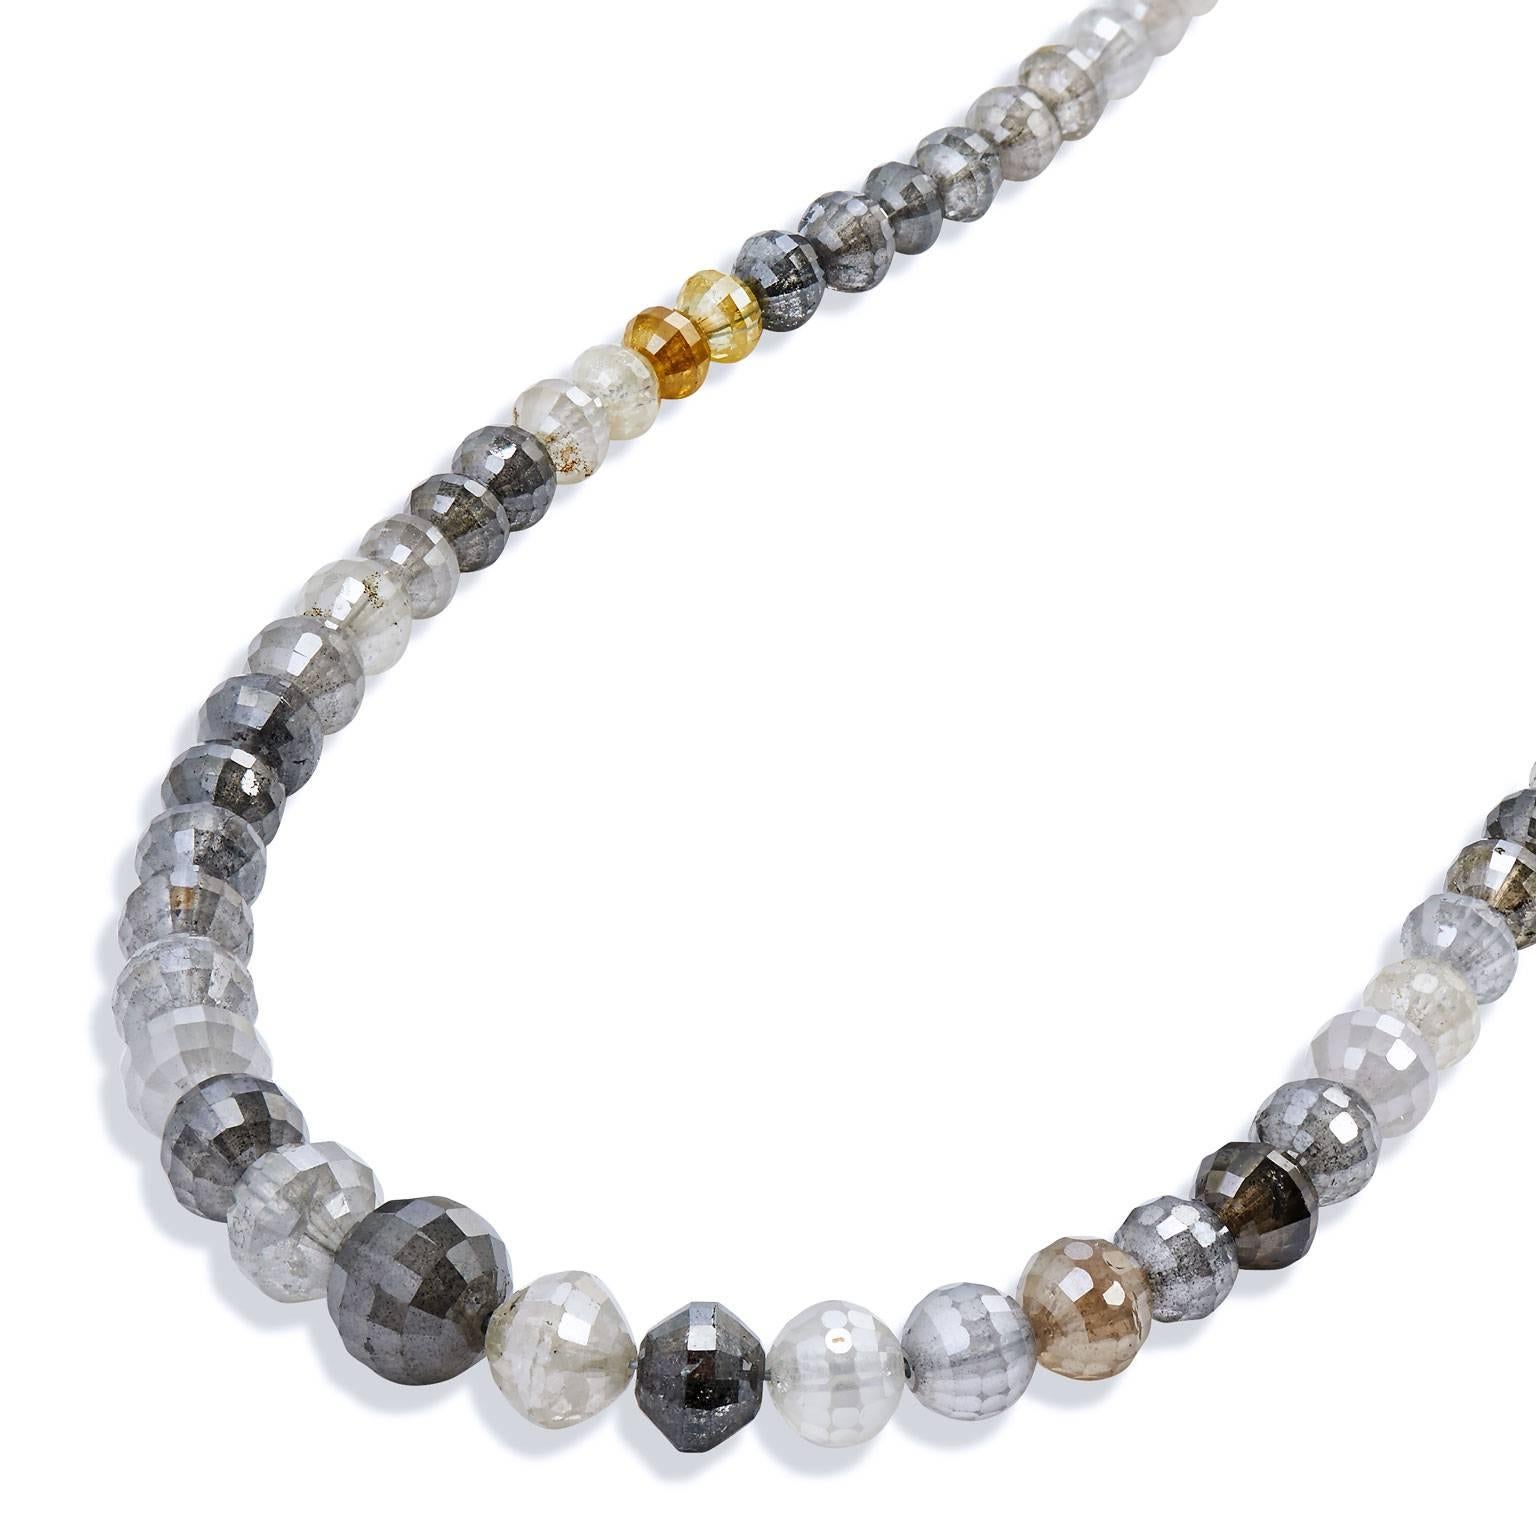 This absolutely stunning diamond necklace is a show stopper!

This necklace has 18 inches of fancy brown, fancy grey and fancy yellow diamond beads with a whopping total of 73.65 carats!

This is a one of kind, handmade piece by H&H that emphasizes